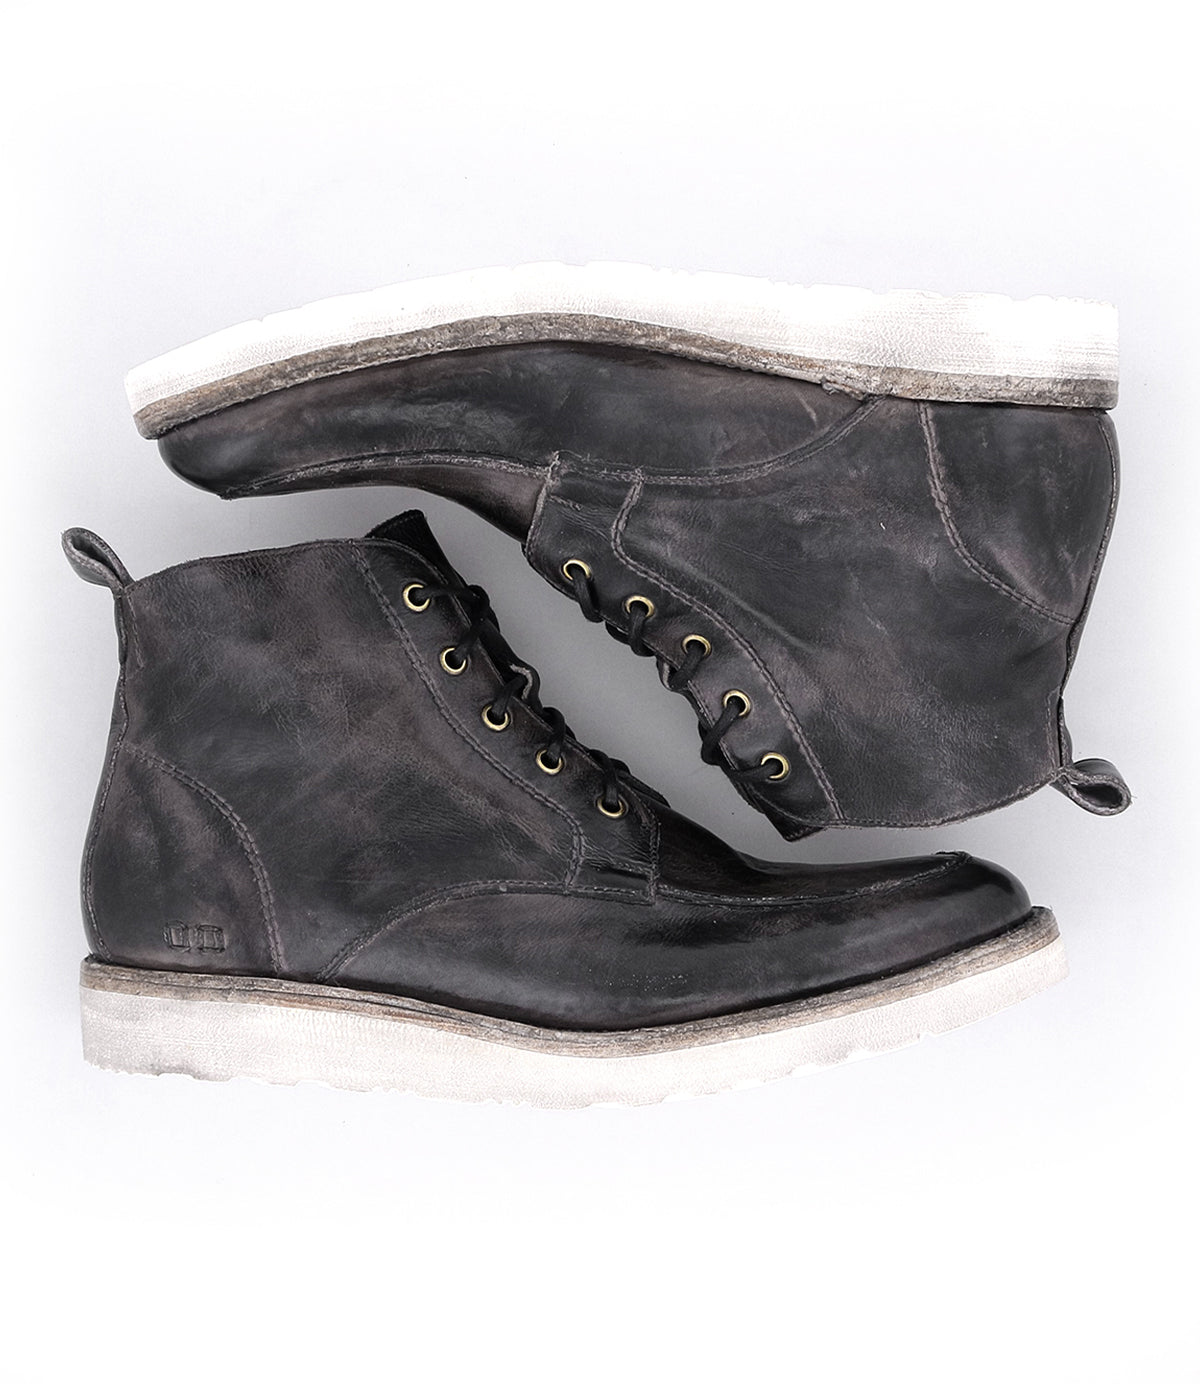 A pair of worn men's Lincoln leather work boots by Bed Stu with laces on a white background.